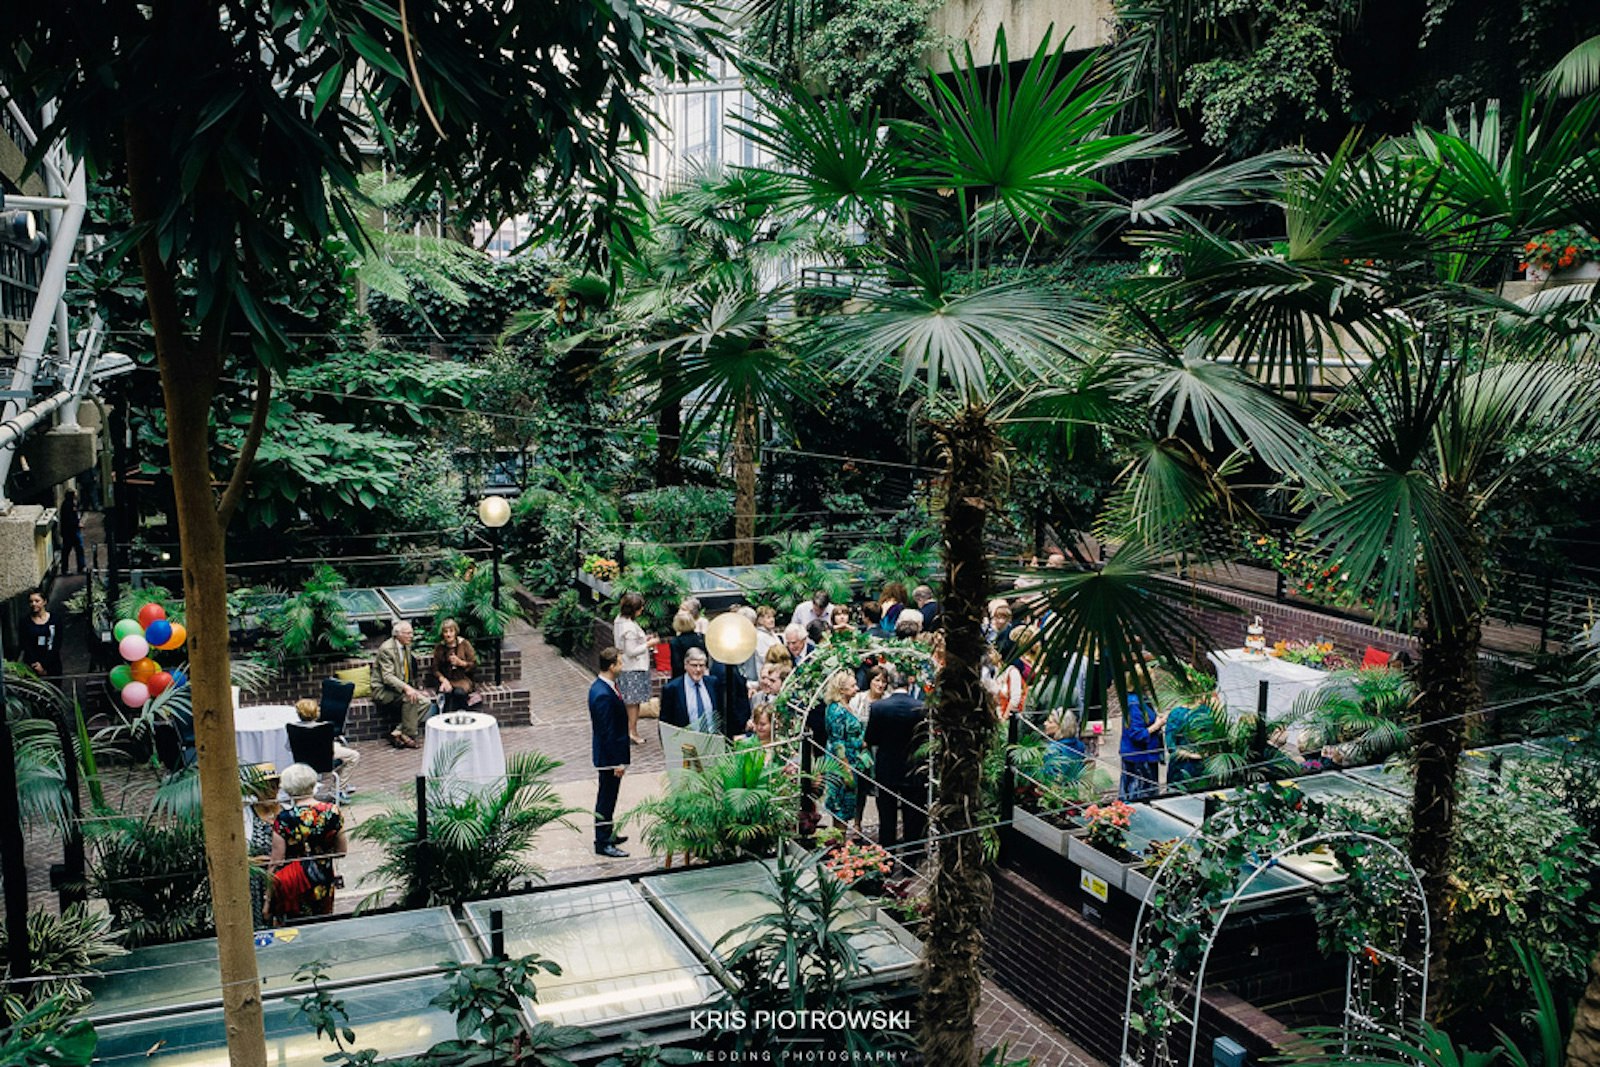 Barbican Centre - The Conservatory image 2